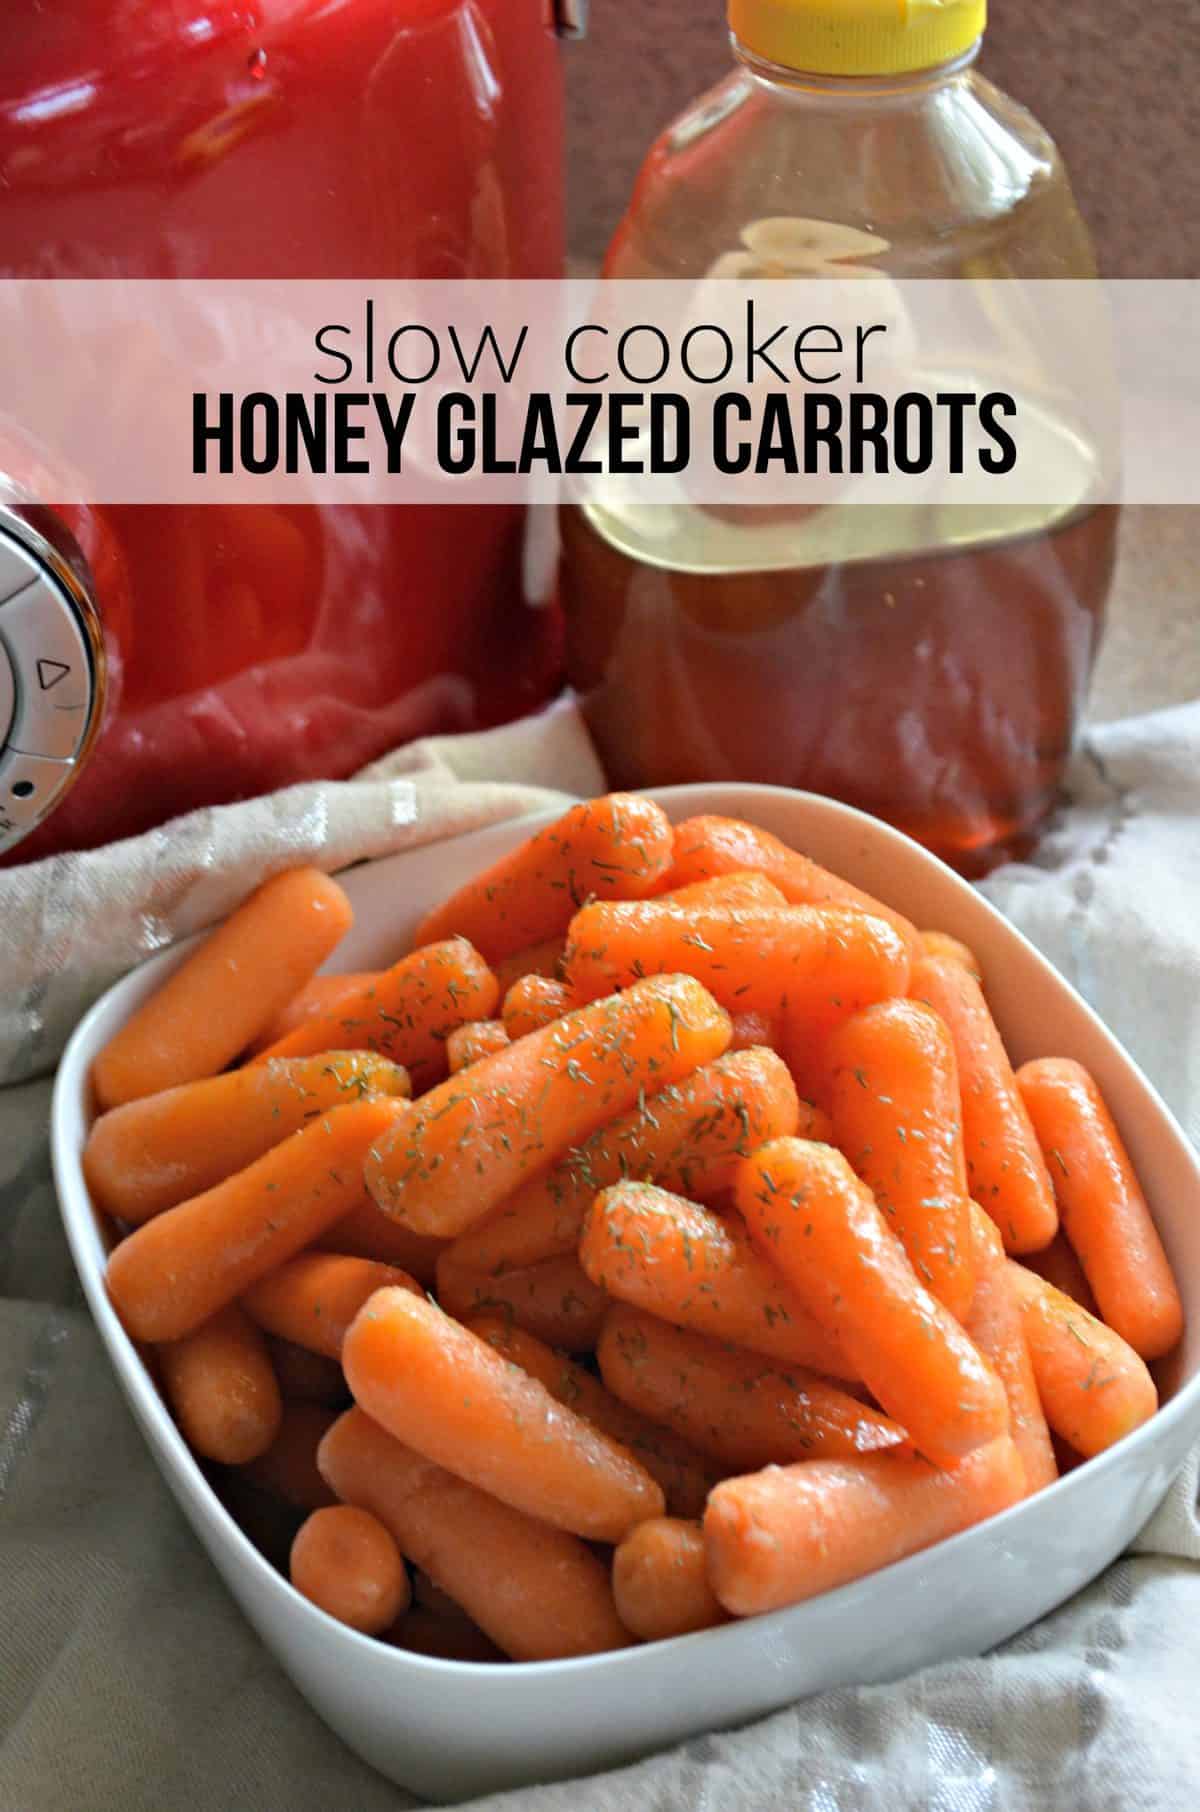 Slow Cooker Honey Glazed Carrots with dried herbs in white bowl on tablecloth.